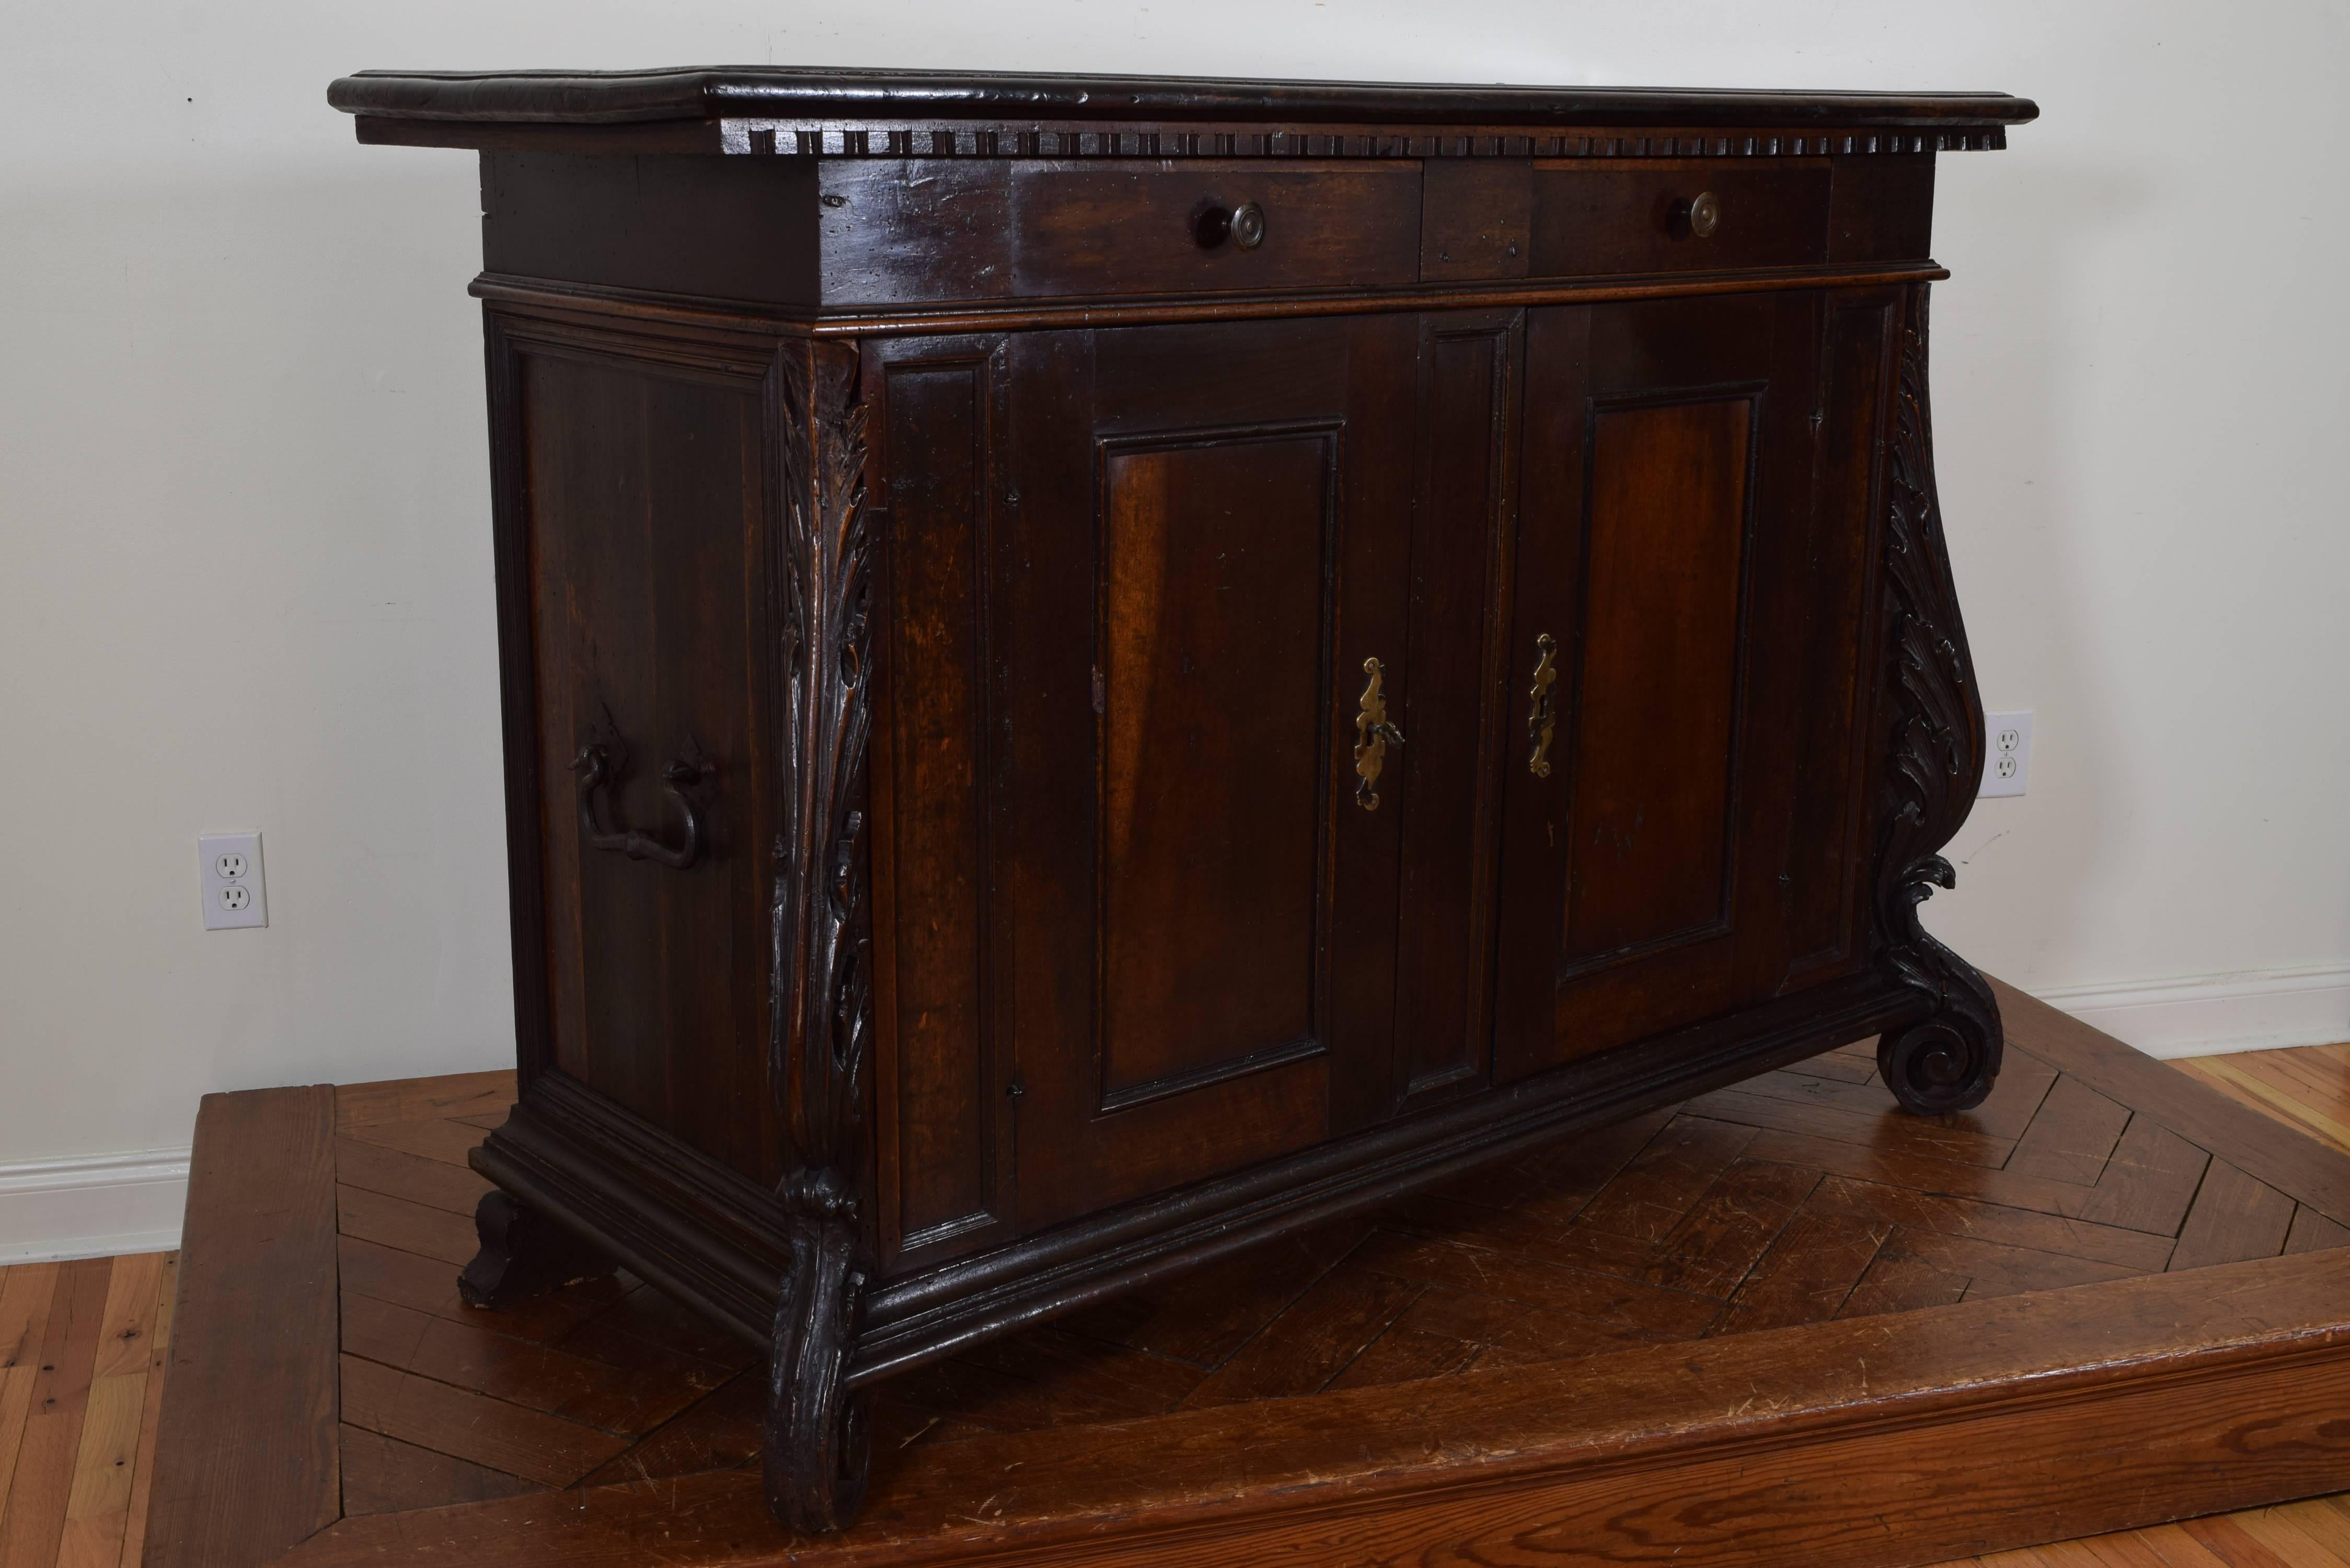 The rectangular top with a dentile molded edge, two drawers over two doors, interesting carved feet extending to nearly the top, wrought iron handles at sides.